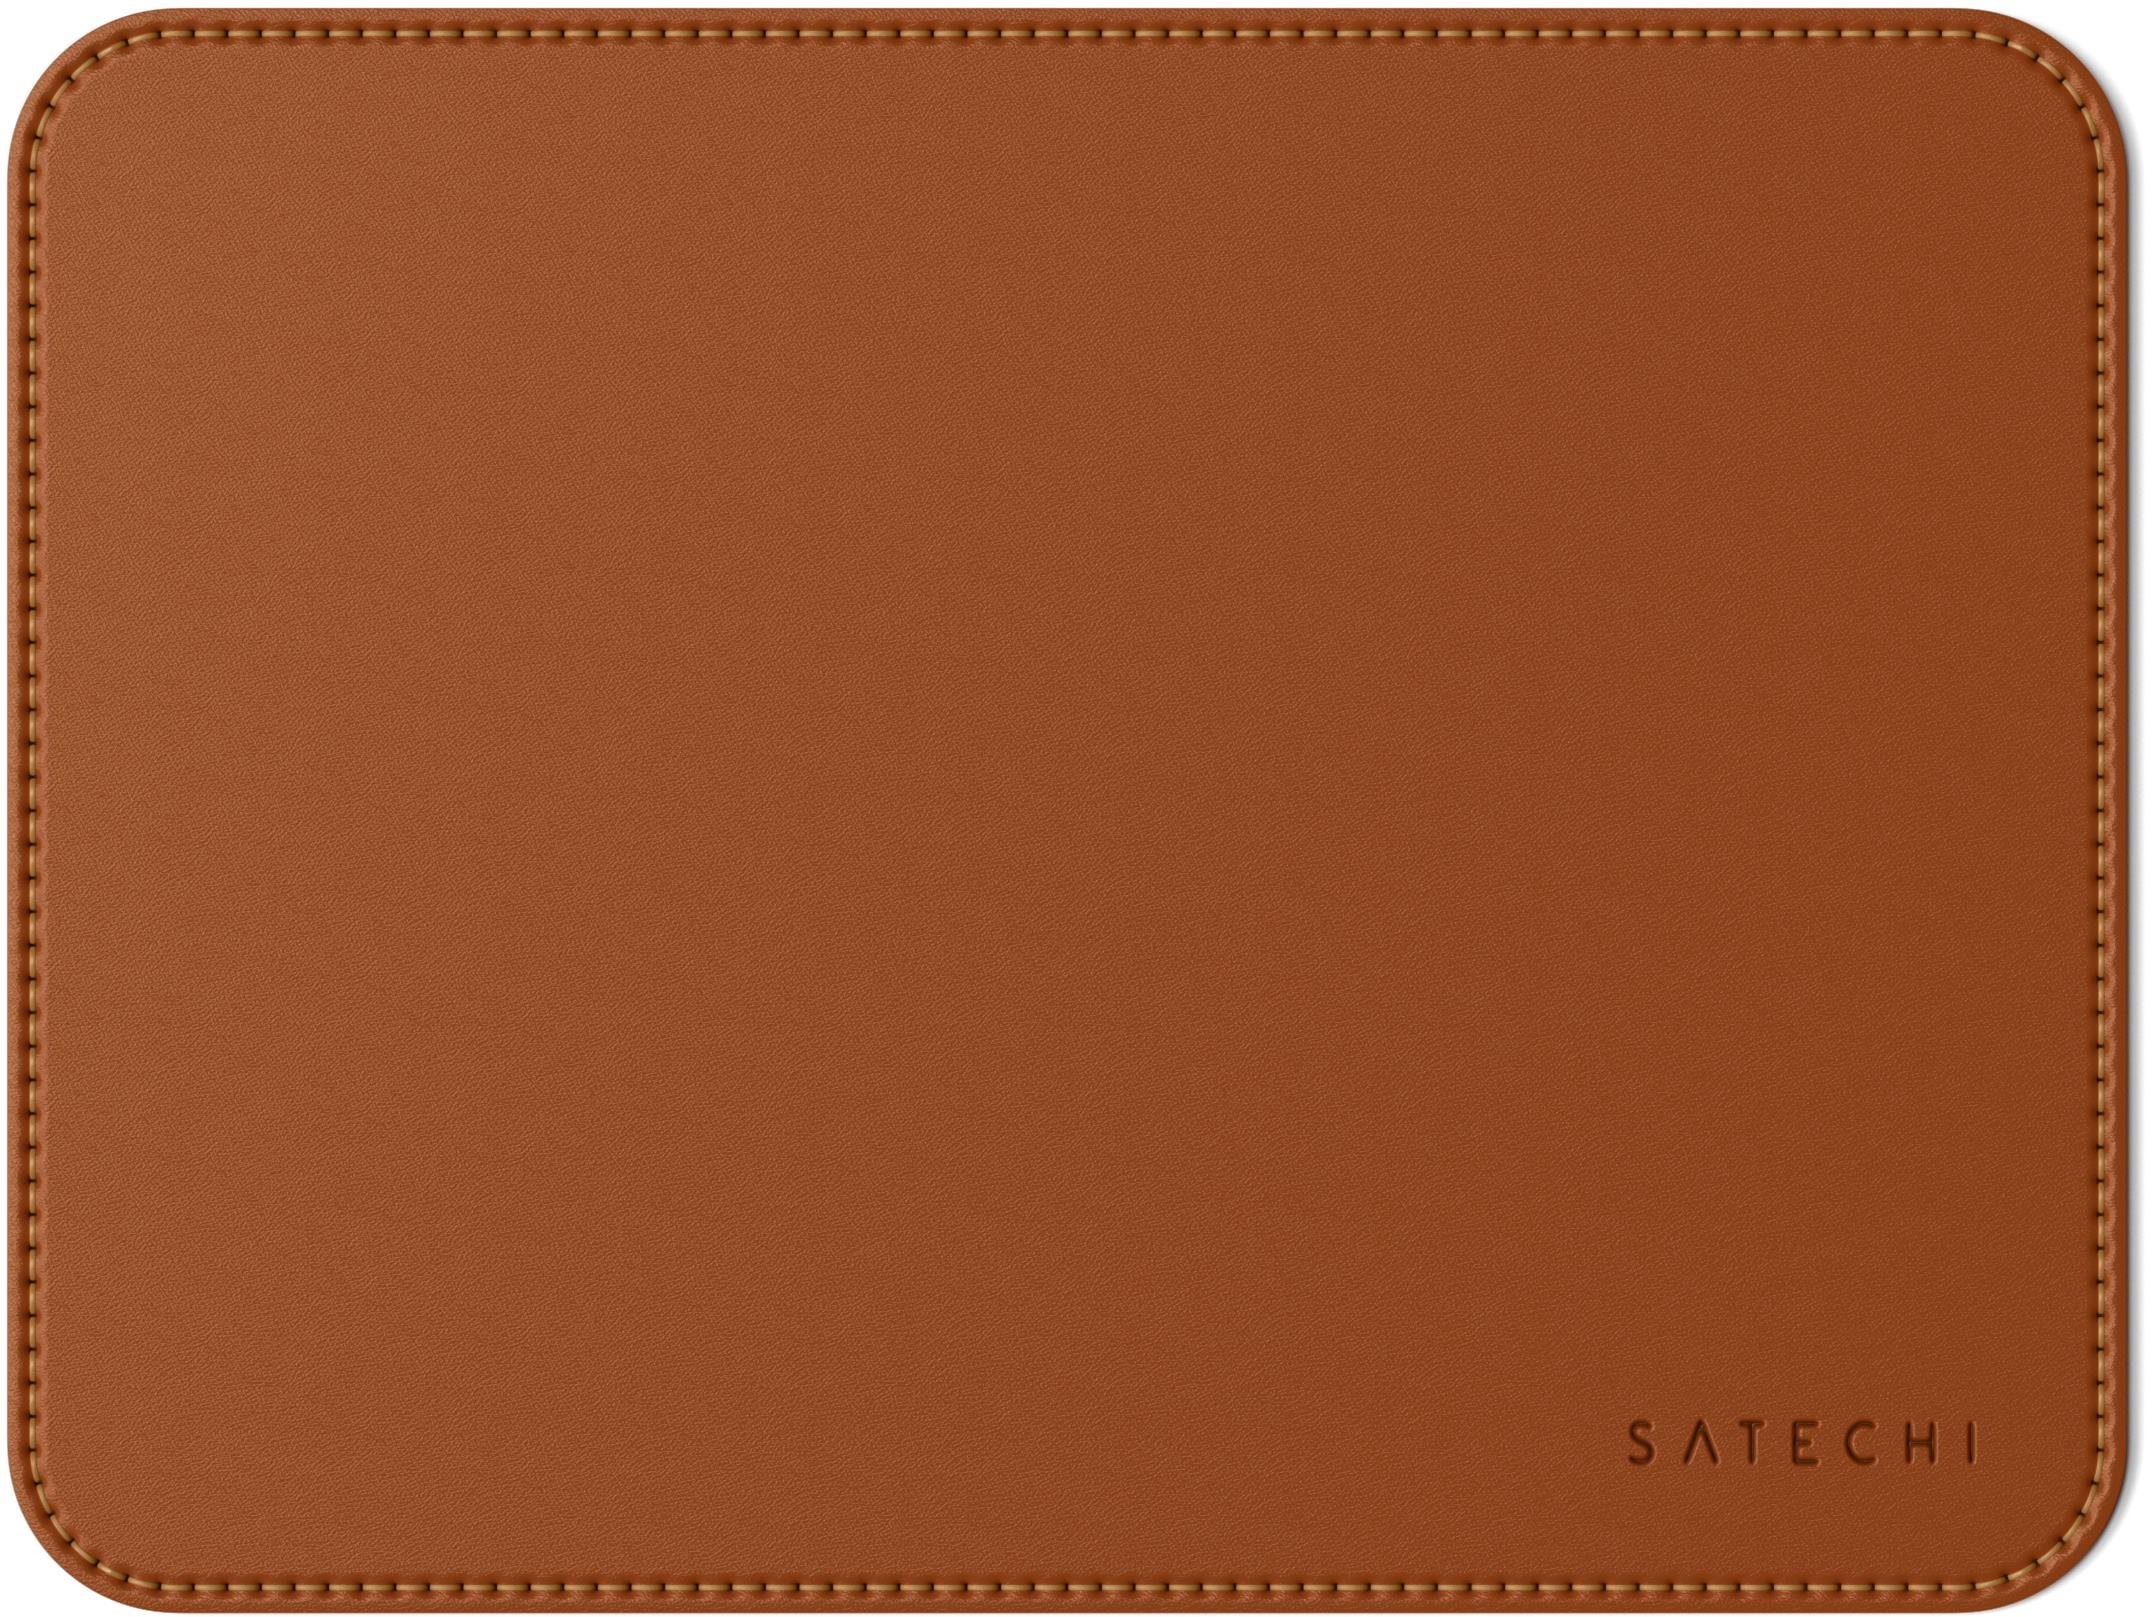 Mouse Pad Satechi Eco Leather Mouse Pad - Brown Screen